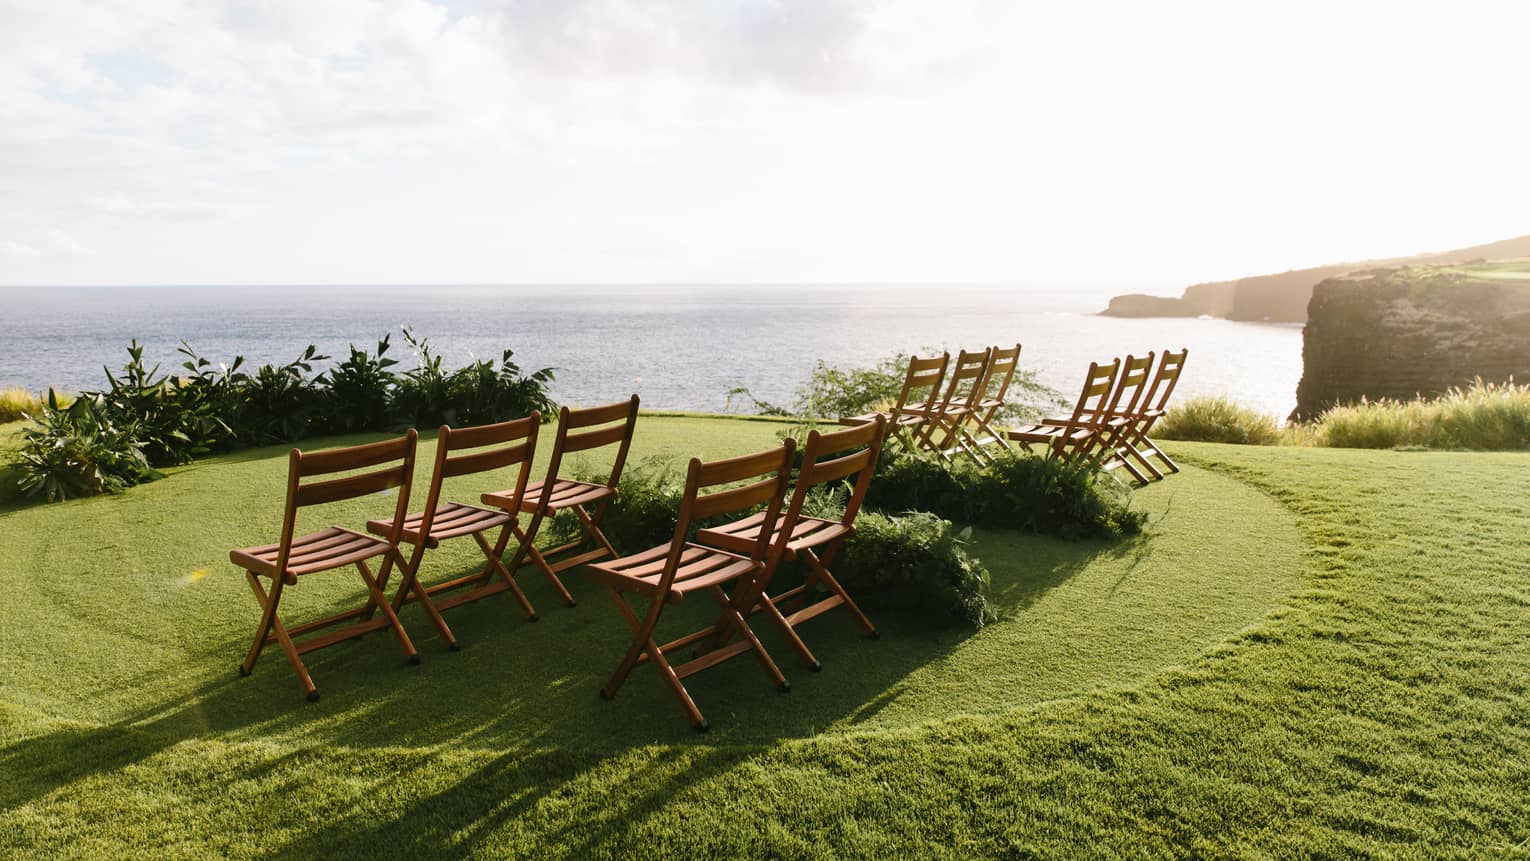 A series of wooden chairs set up on a golf course overlooking a calm sea.